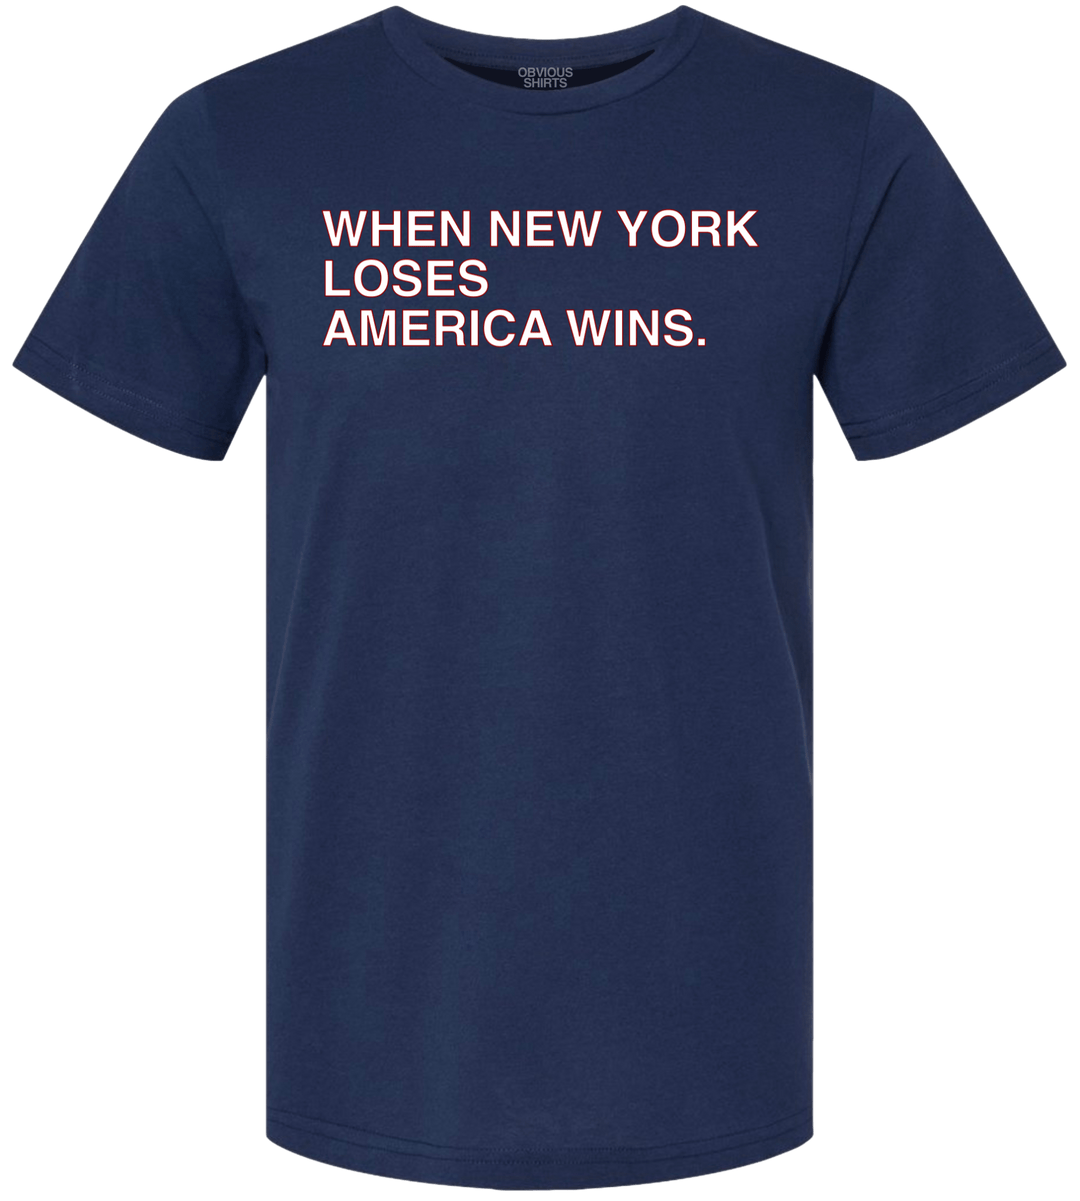 WHEN NEW YORK LOSES AMERICA WINS. - OBVIOUS SHIRTS